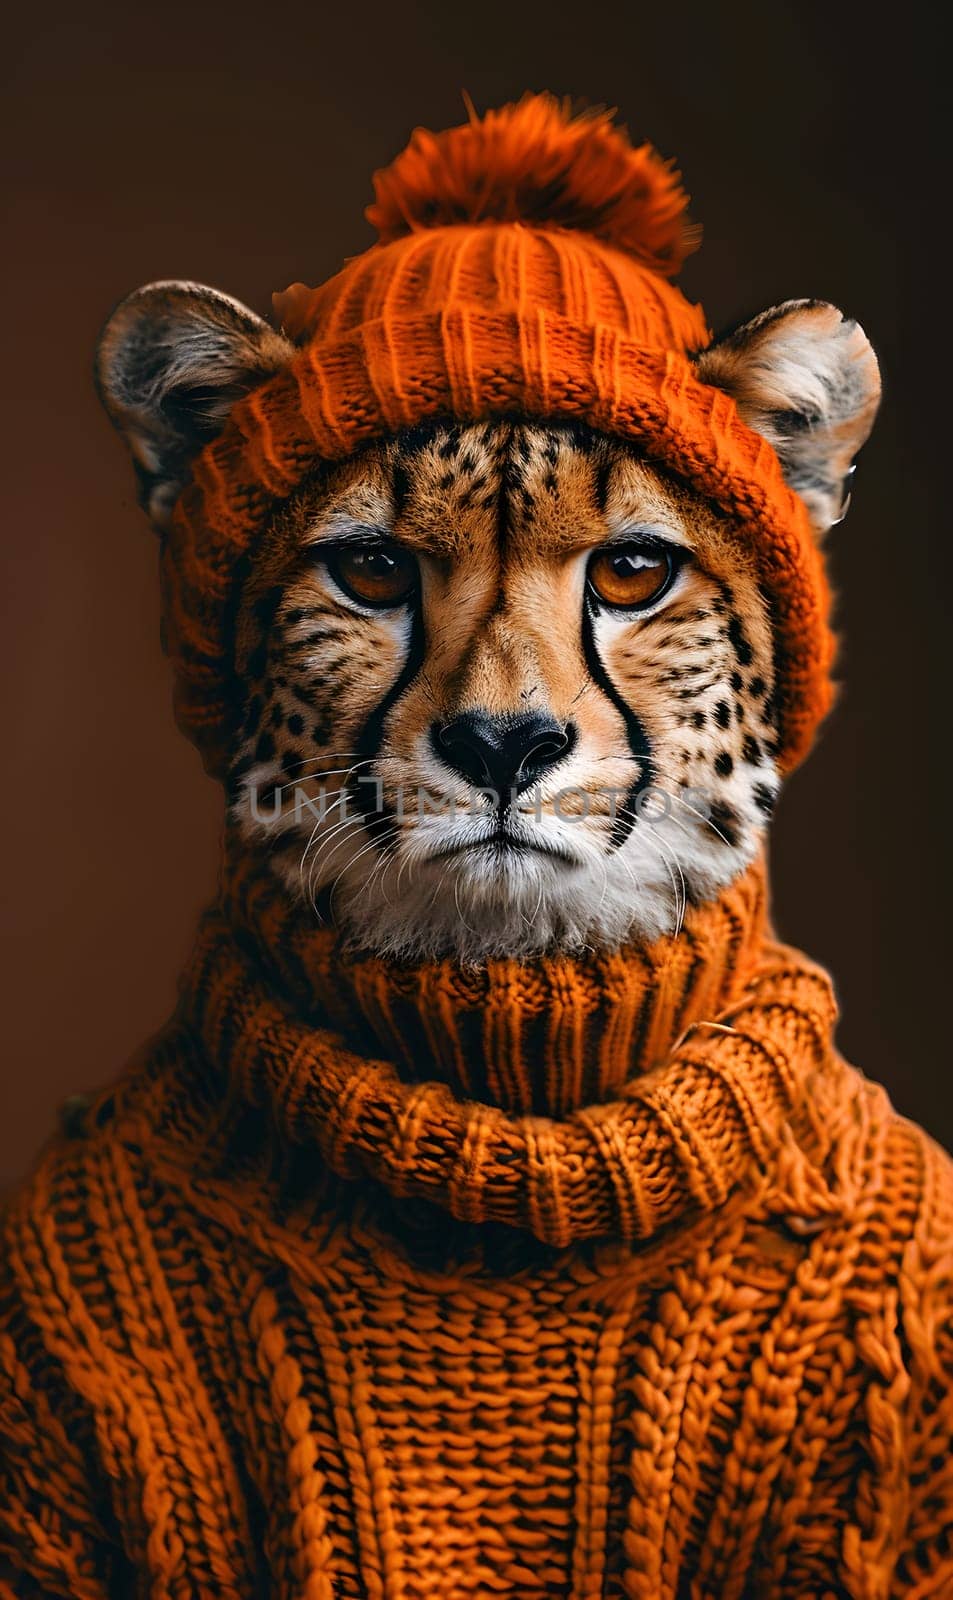 A Felidae member, the cheetah, dons a unique look with an orange hat and sweater. Unlike Bengal tigers and Siberian tigers, cheetahs are known for their speed and distinctive spots